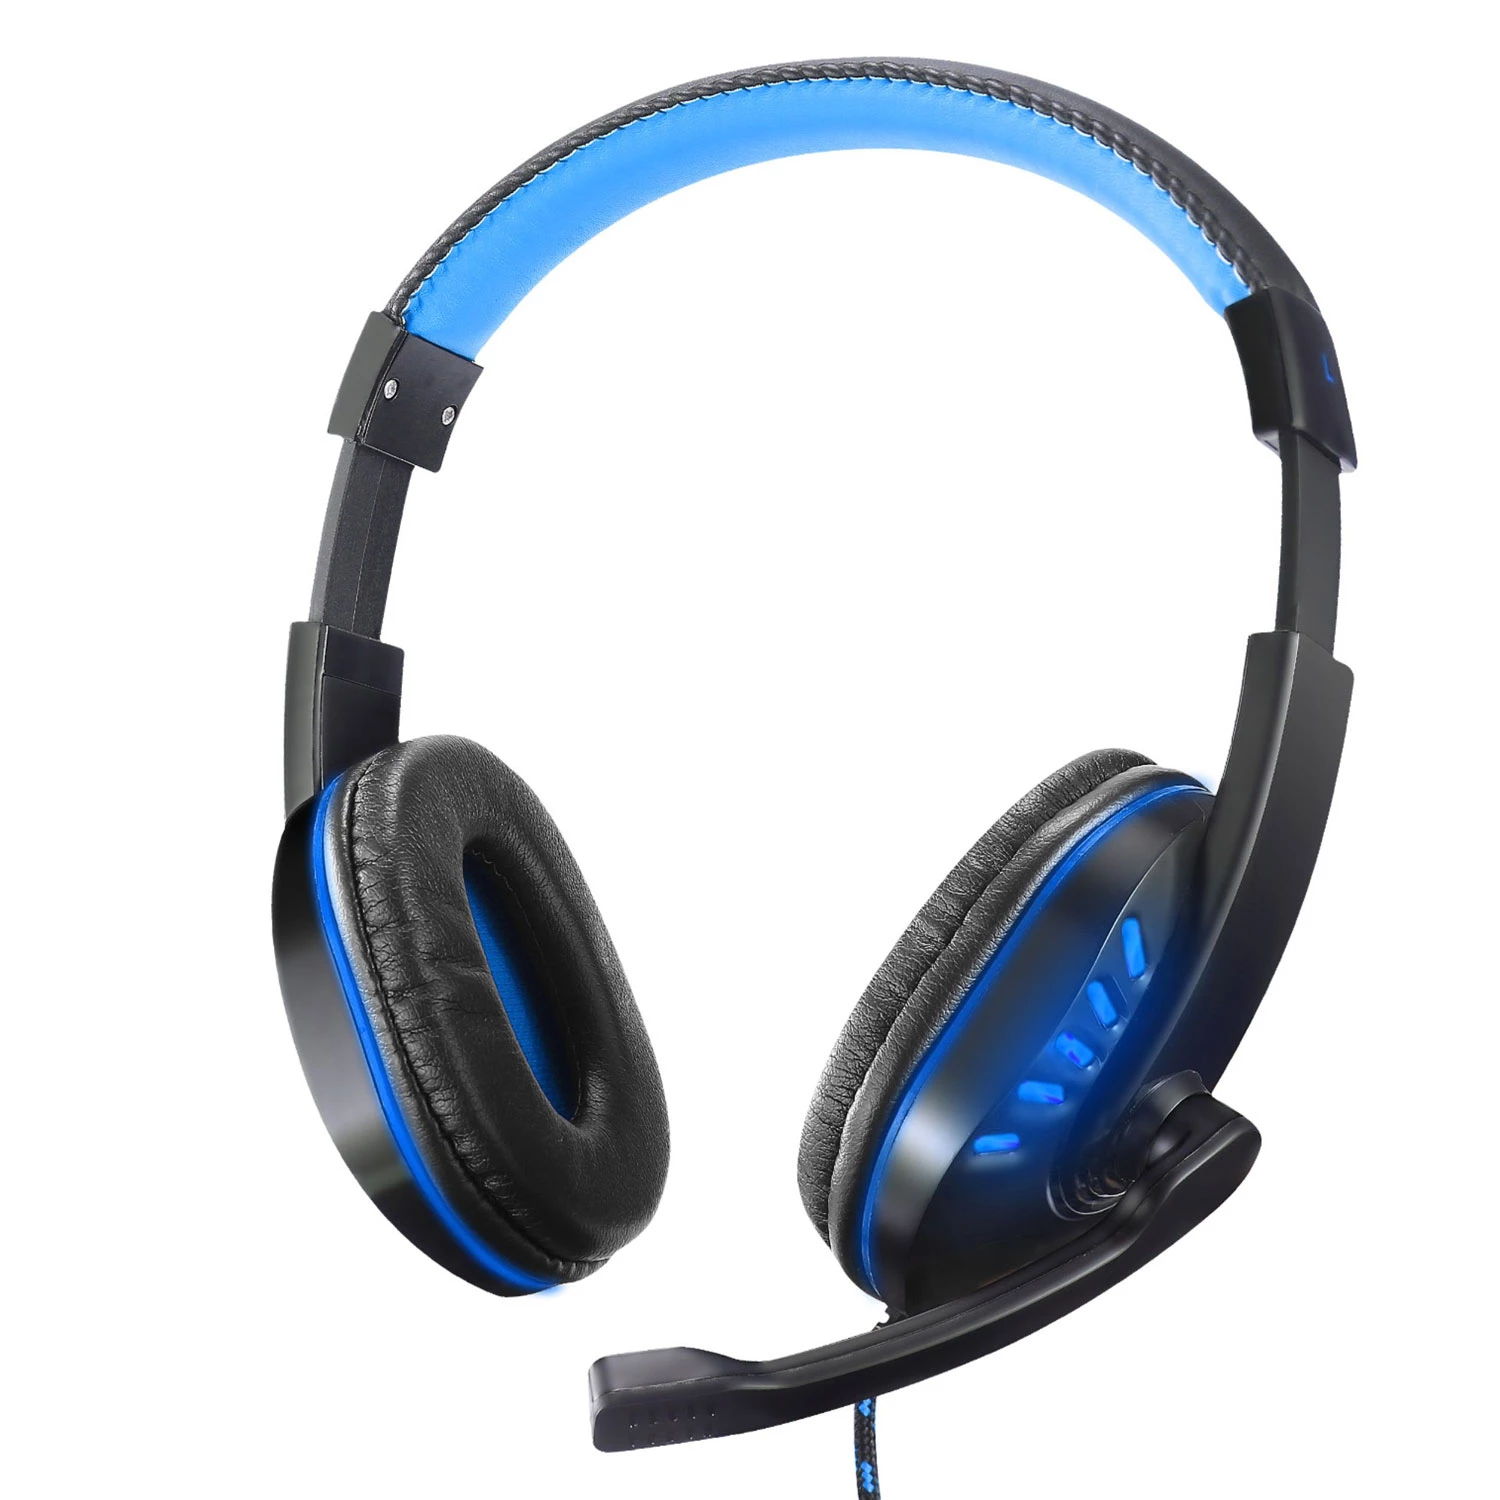 Stereo Gaming Headset with LED Light, Noise Isolation, Soft Memory Earmuffs, Mic, 3.5mm Plug, USB, 6